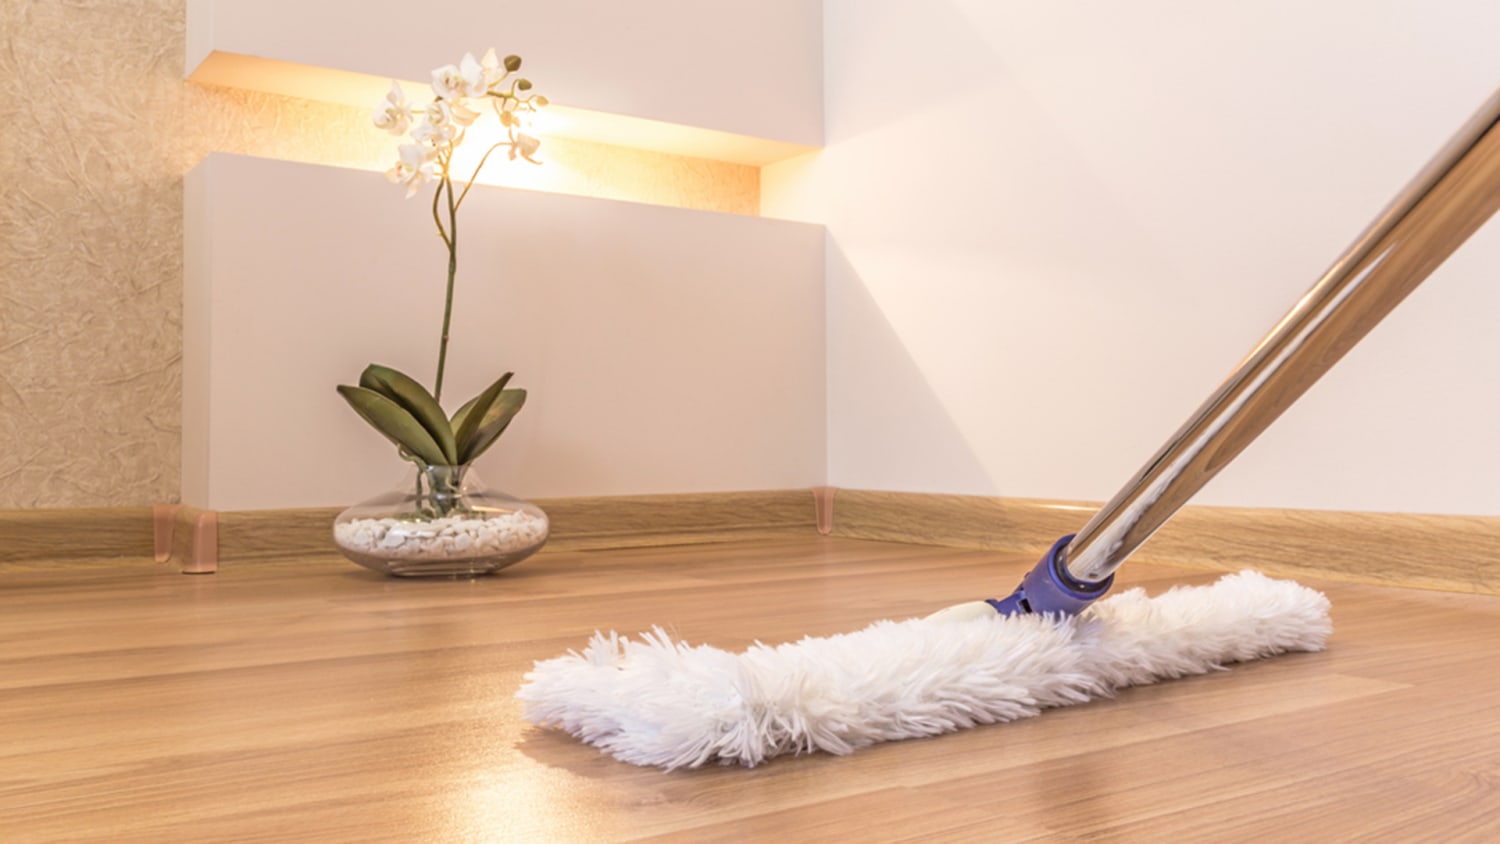 How To Clean Hardwood Floors The Right Way, What Are The Best Hardwood Floor Cleaners